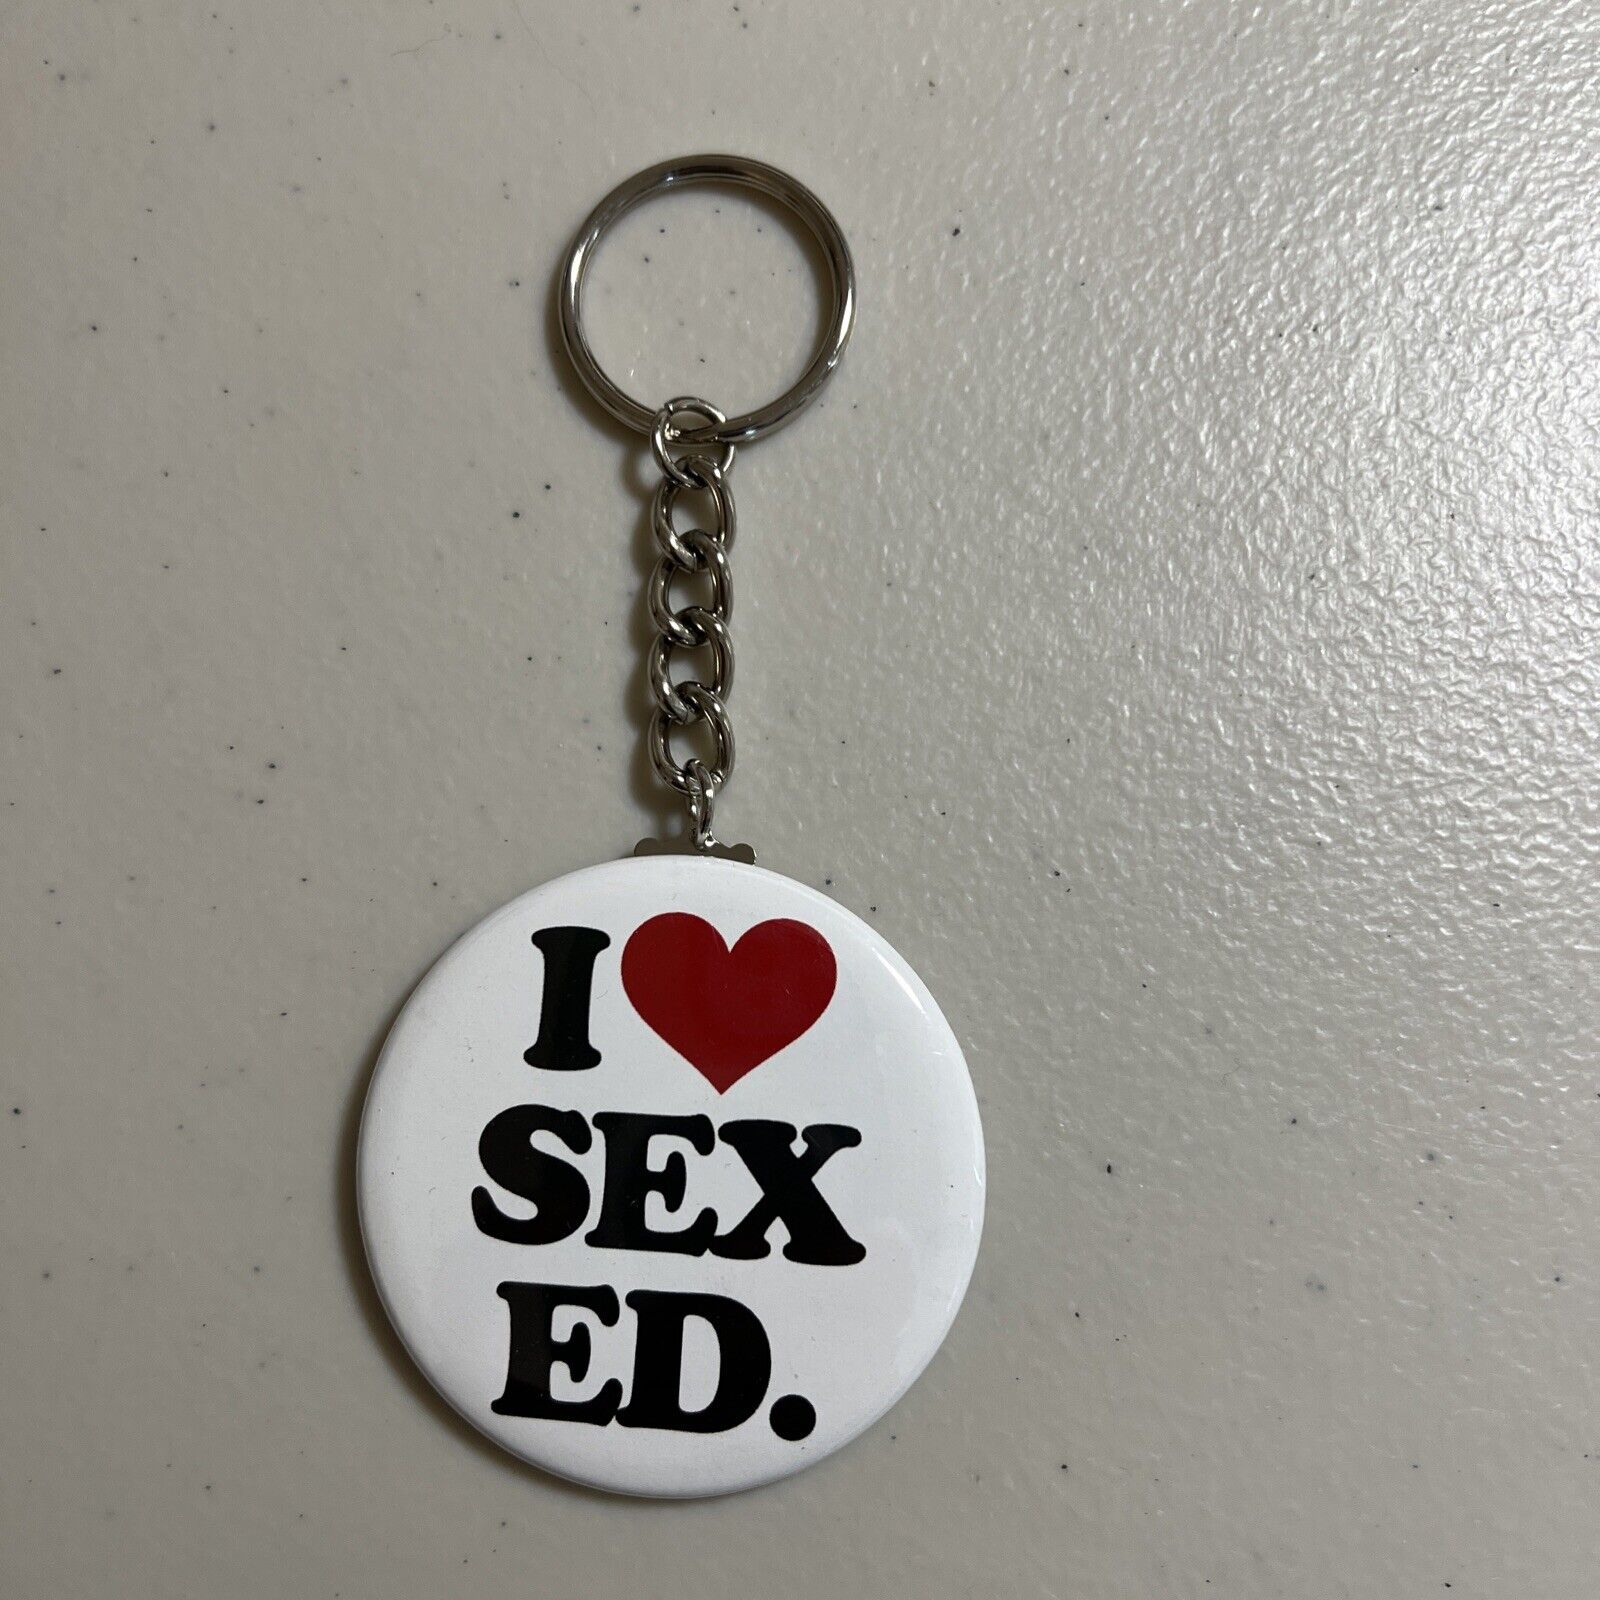 I Love Sex Ed Keychain, Sexuality, Sex Education. New